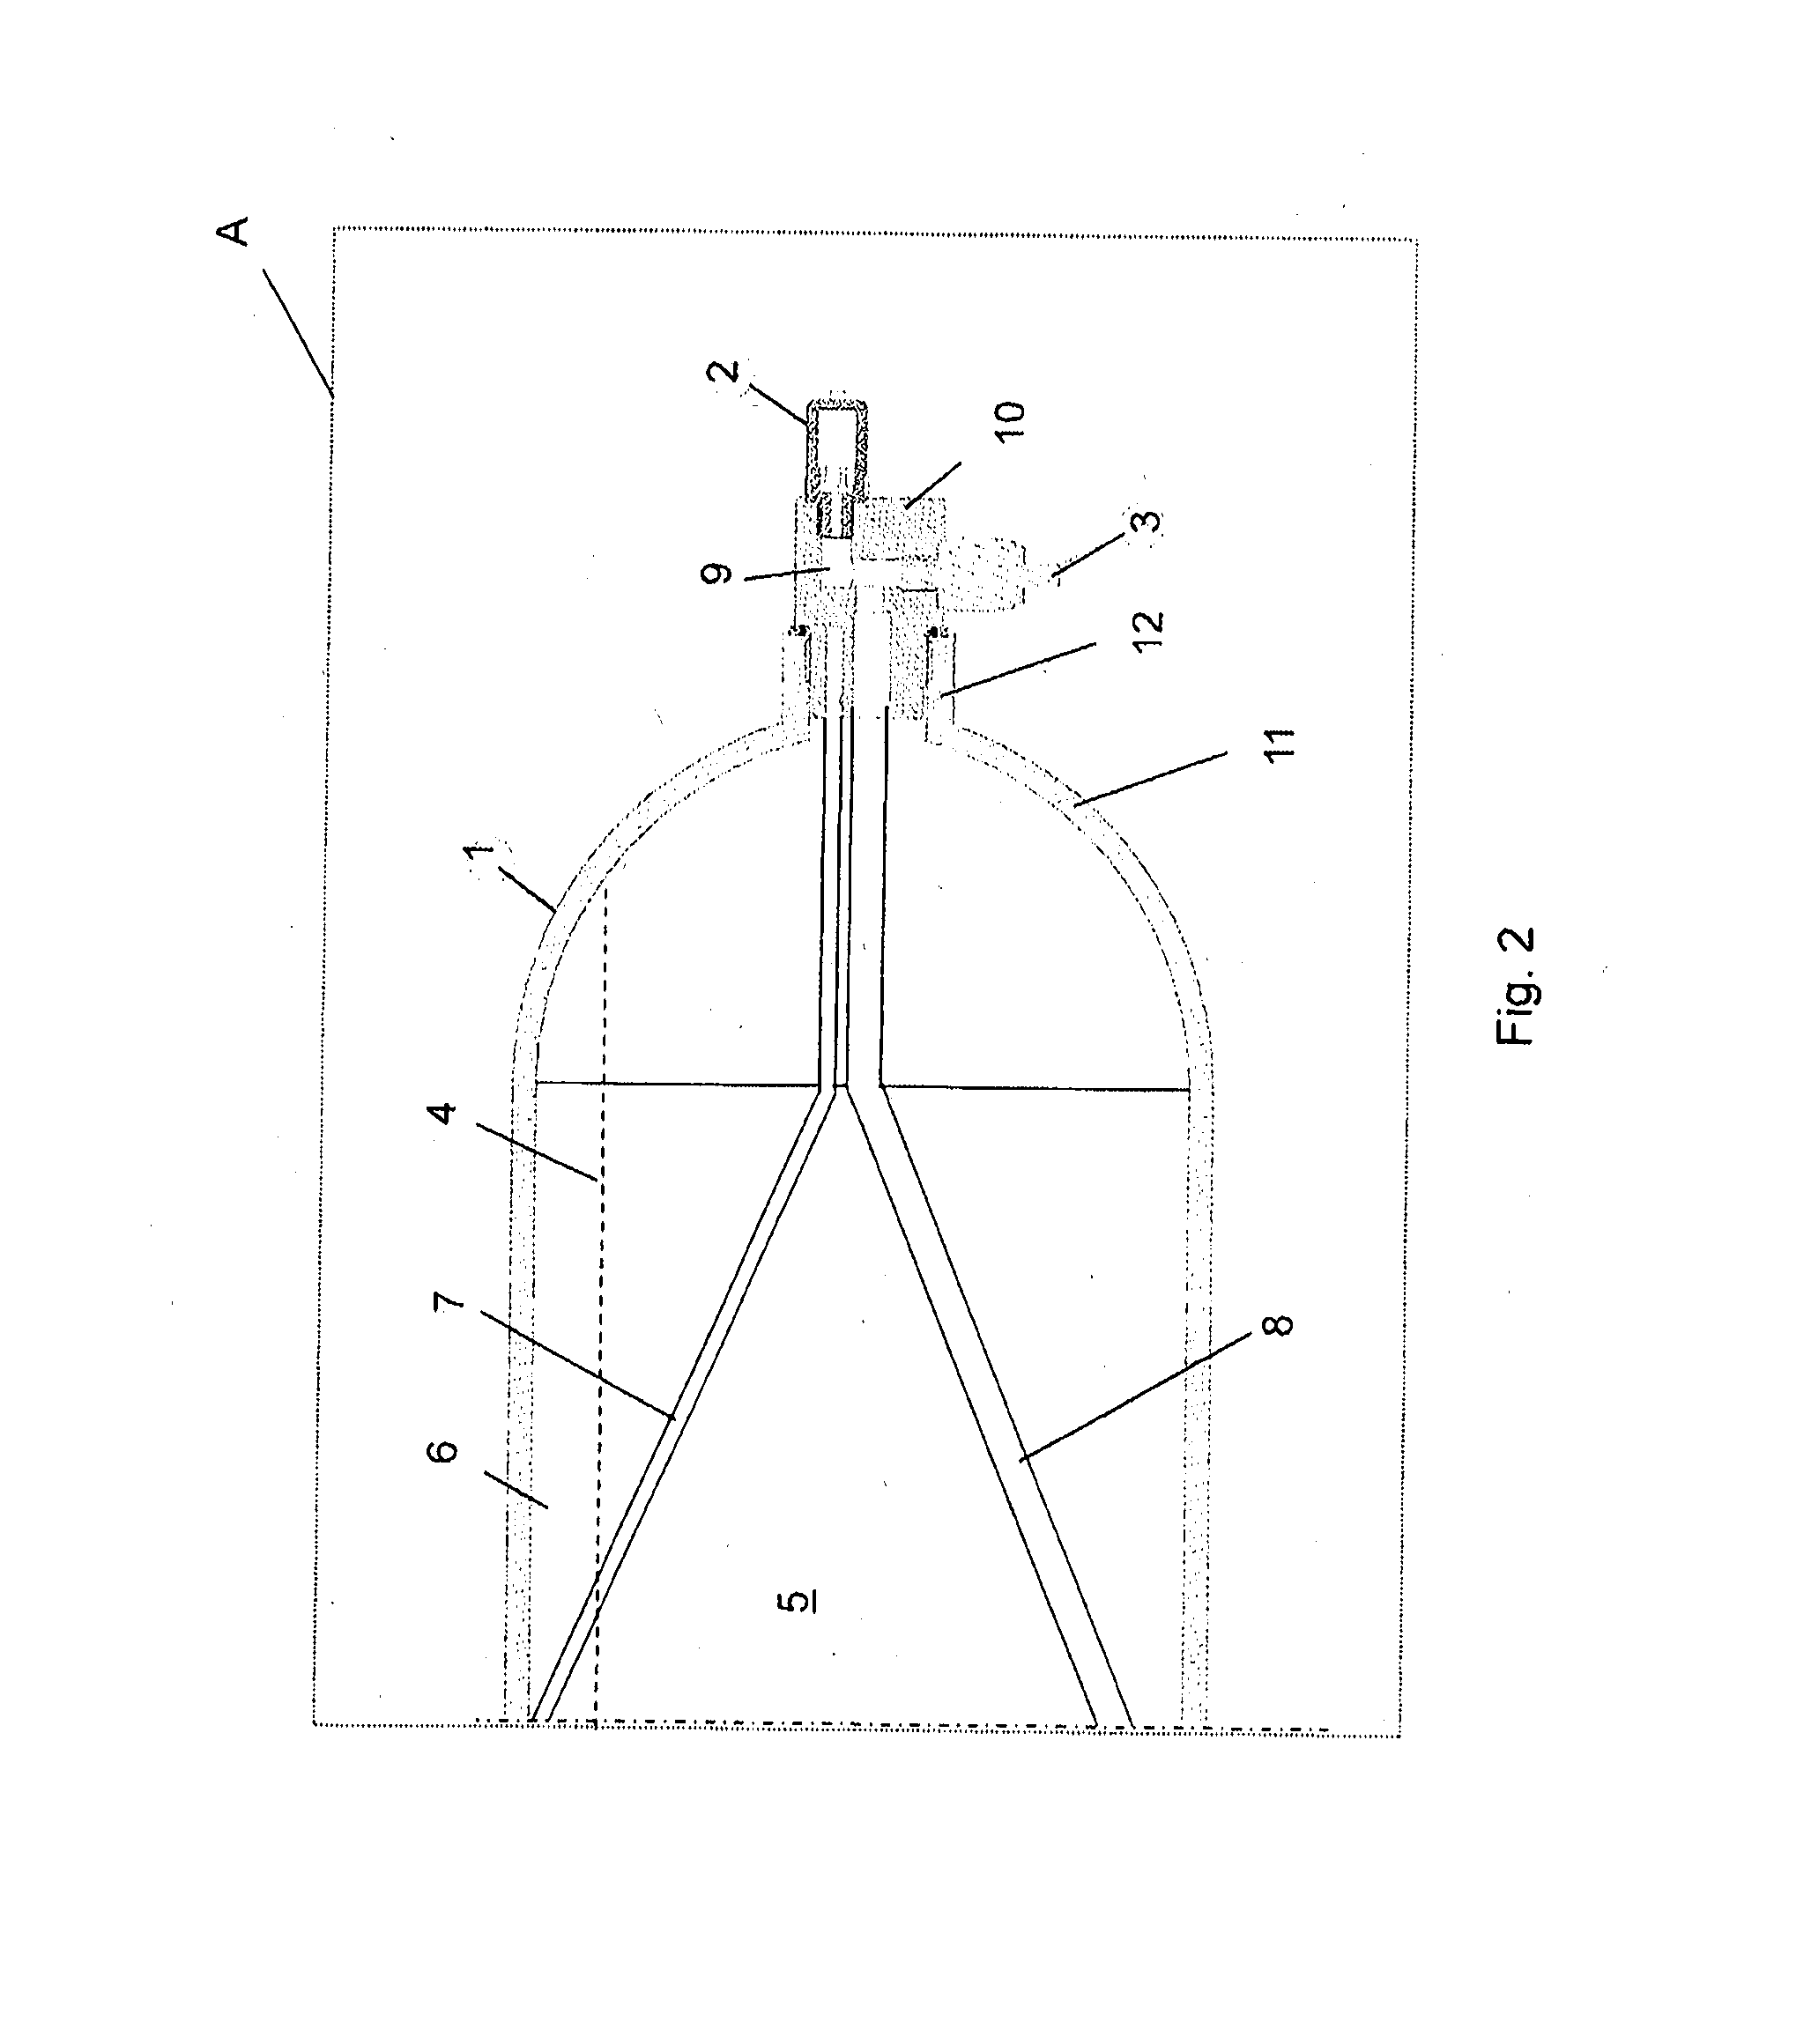 Method And Apparatus In A Medium Source Of A Fire-Fighting System